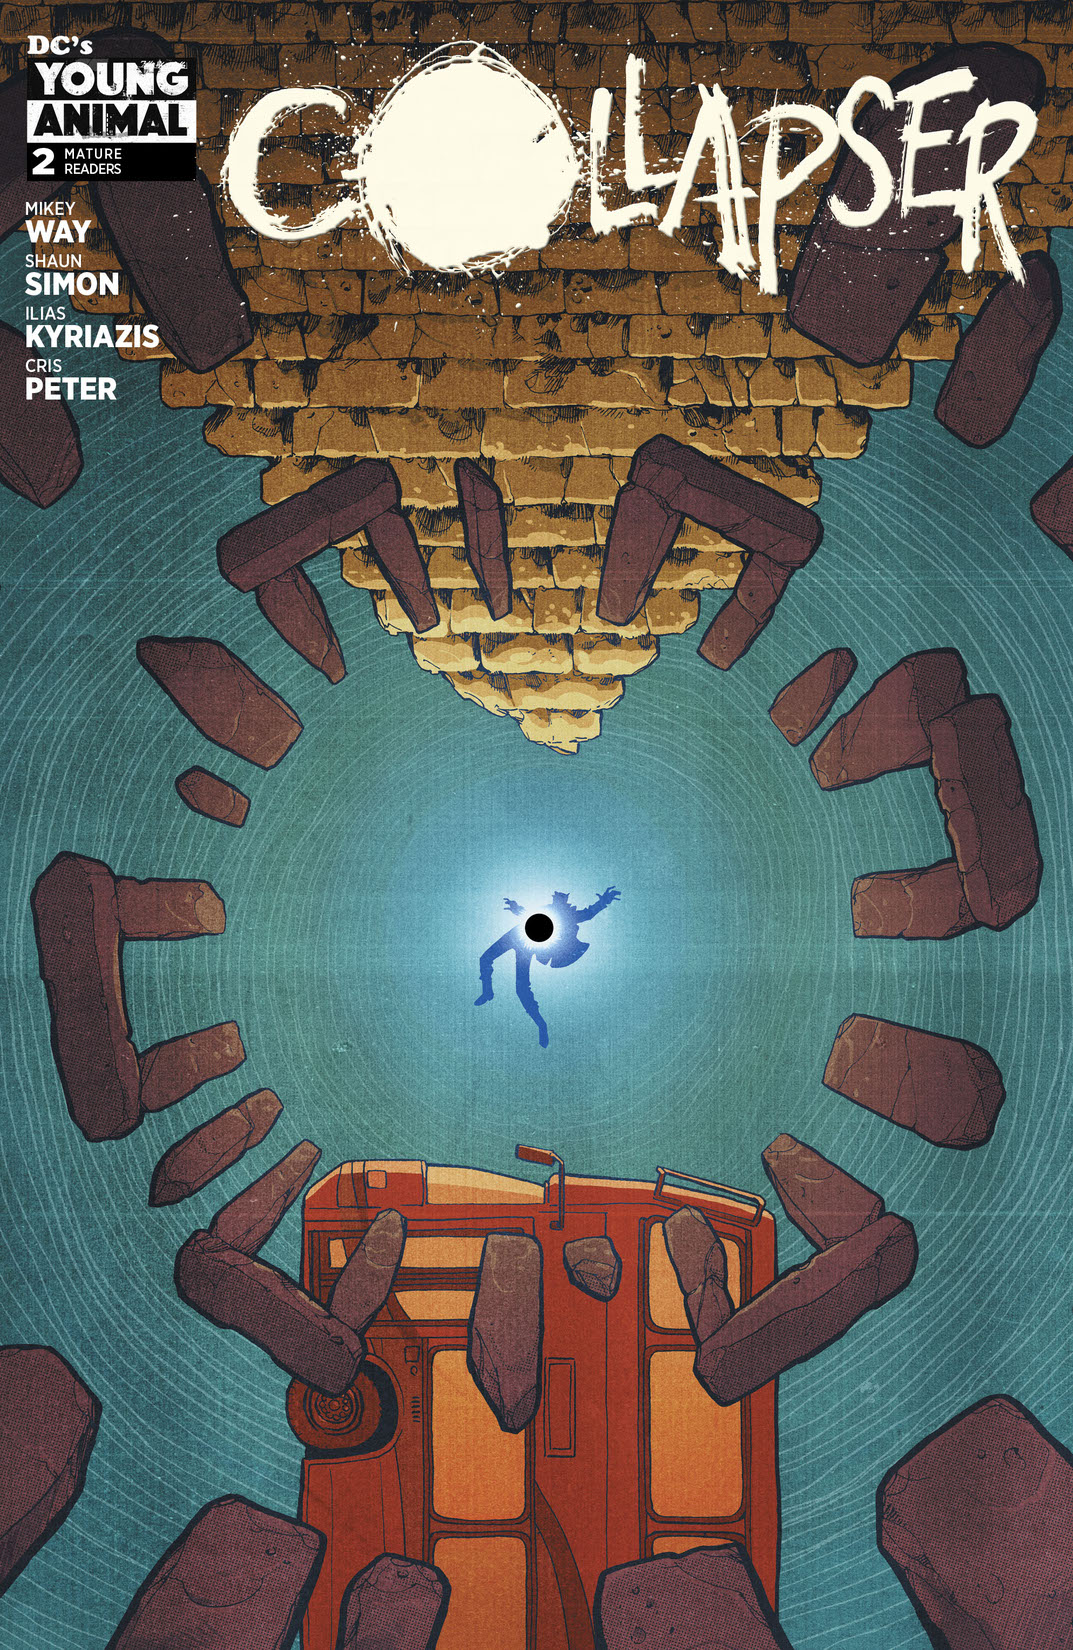 Collapser #2 preview images